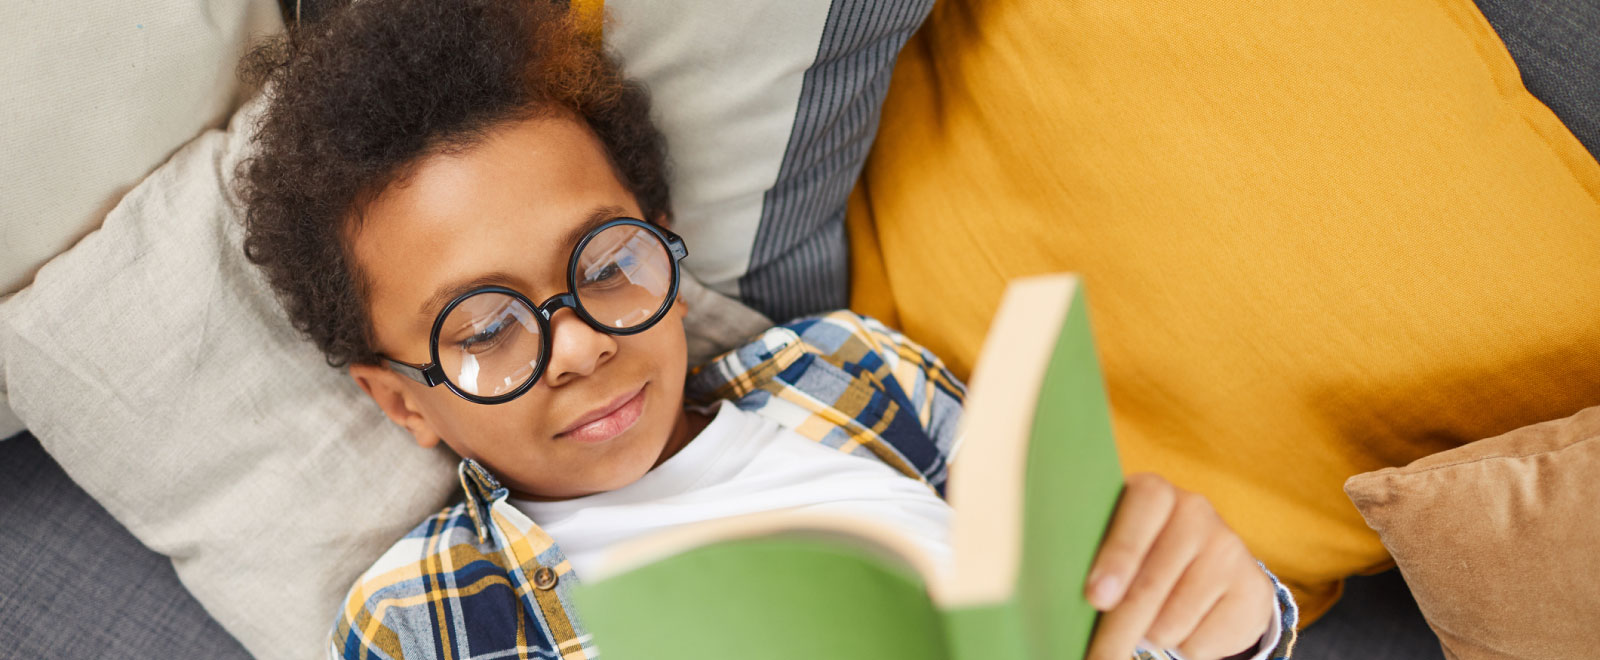 A young boy laying on a couch reading with glasses on.